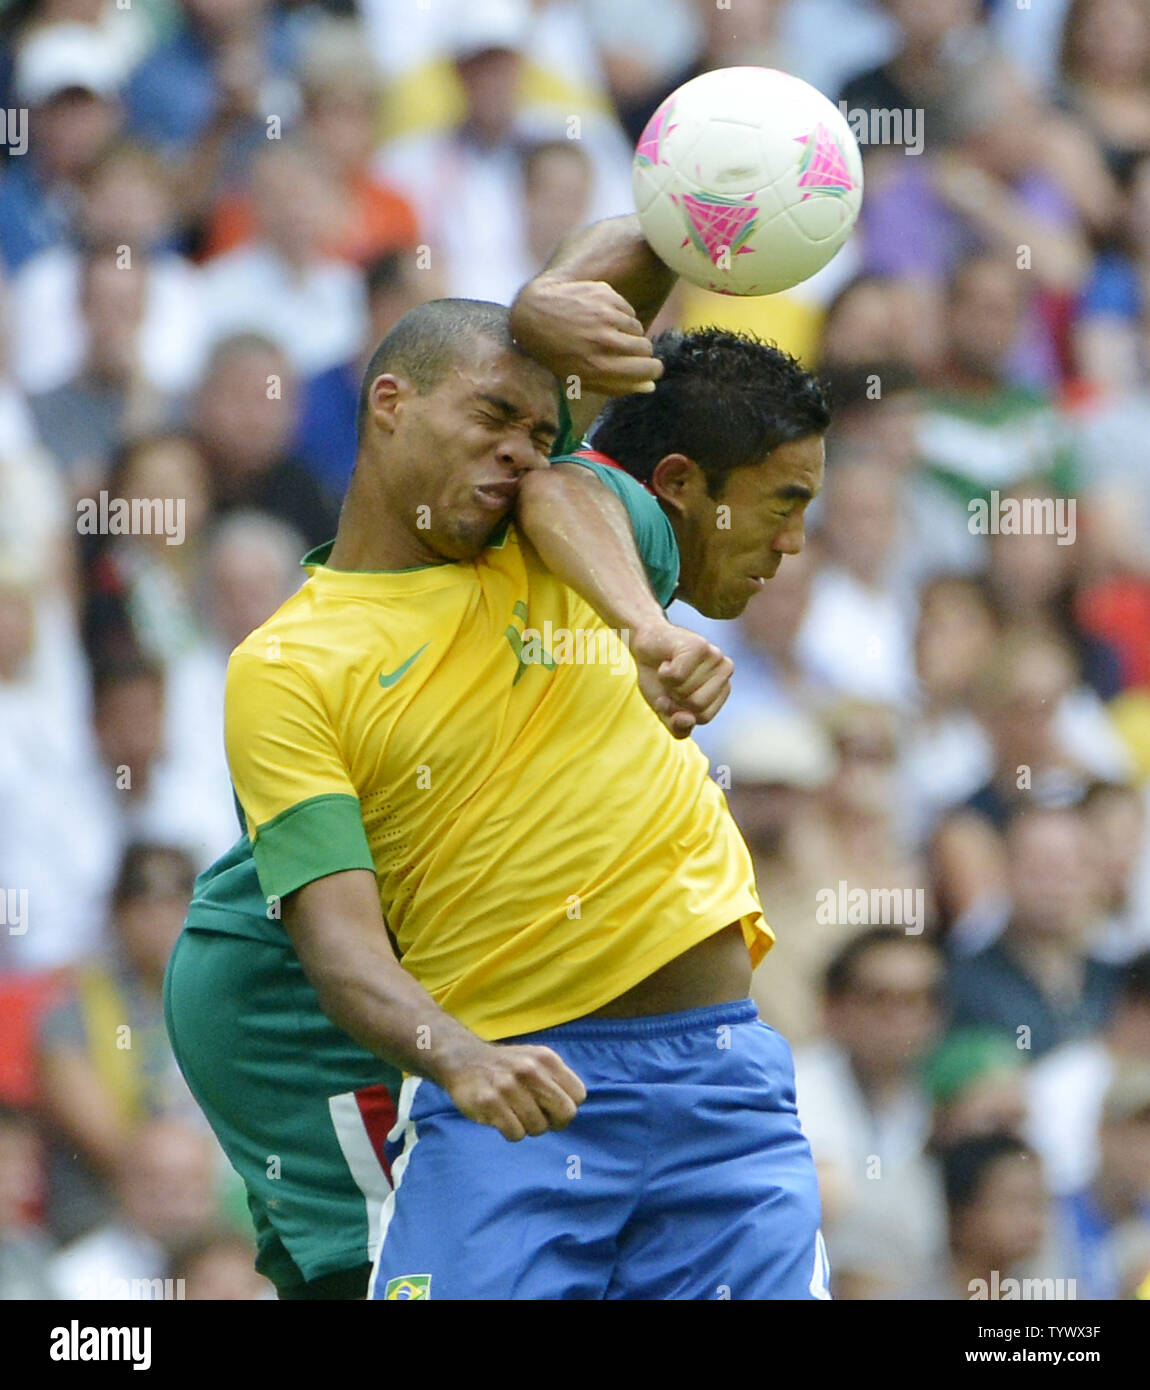 Defender Juan Jesus of Brazil (L) and forward Marco Fabian of Mexico go for the ball during the first half of the Gold Medal Football Match at the London 2012 Summer Olympics on August 11, 2012 at Wembley Stadium, London.      UPI/Brian Kersey Stock Photo